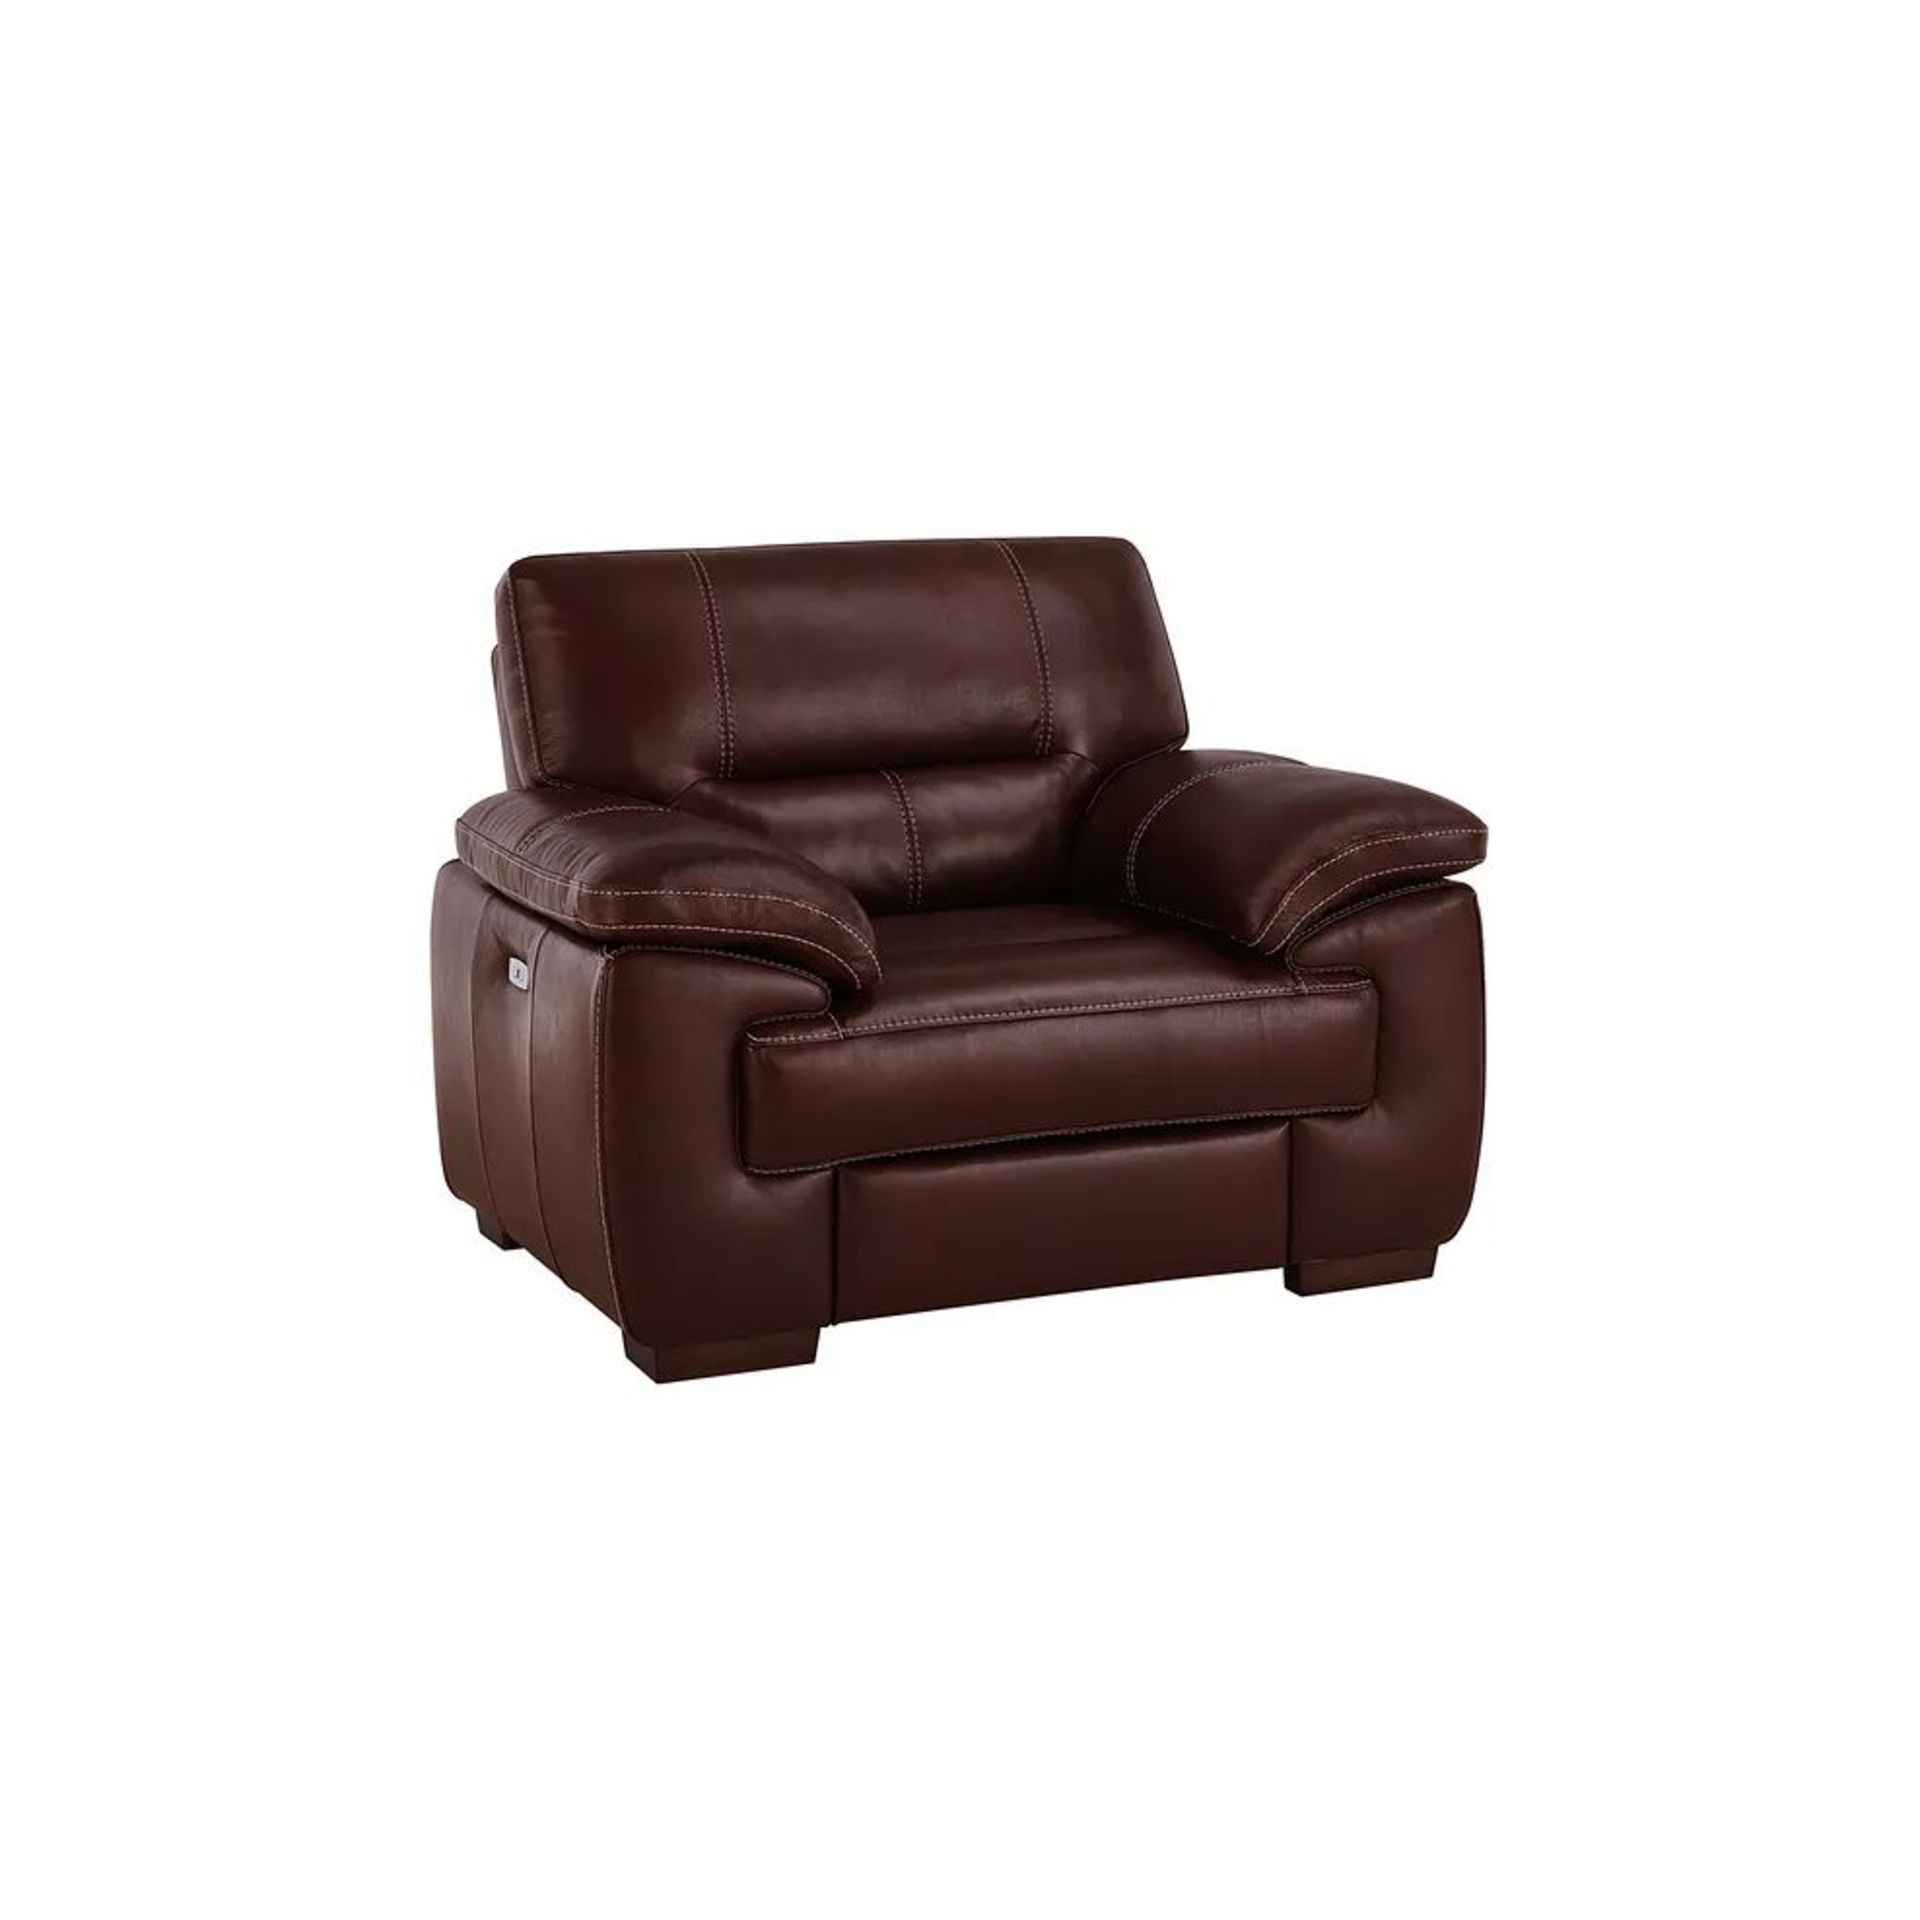 BRAND NEW ARLINGTON Electric Recliner Armchair - TAN LEATHER. RRP £1199. Create a traditional and